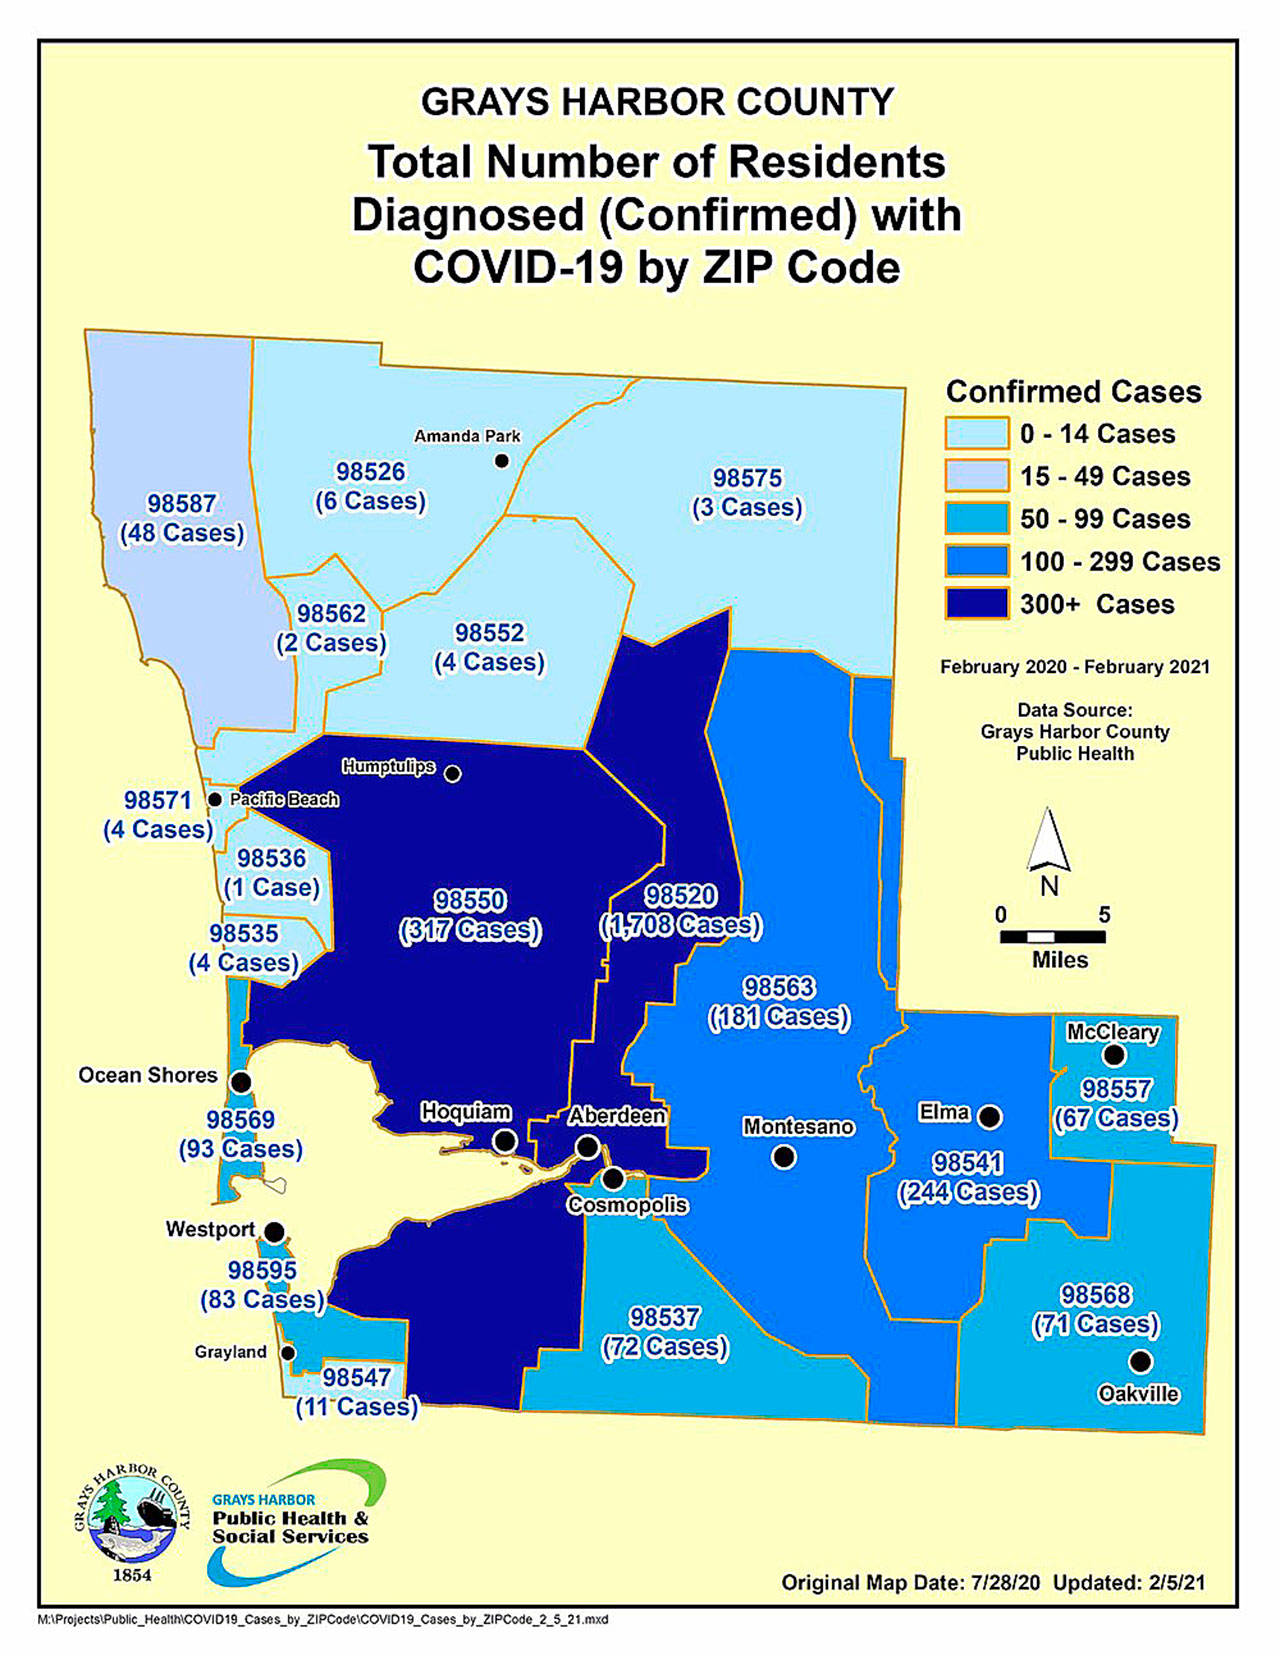 COURTESY GRAYS HARBOR PUBLIC HEALTH 
Total COVID-19 case numbers by zip code, updated Friday.